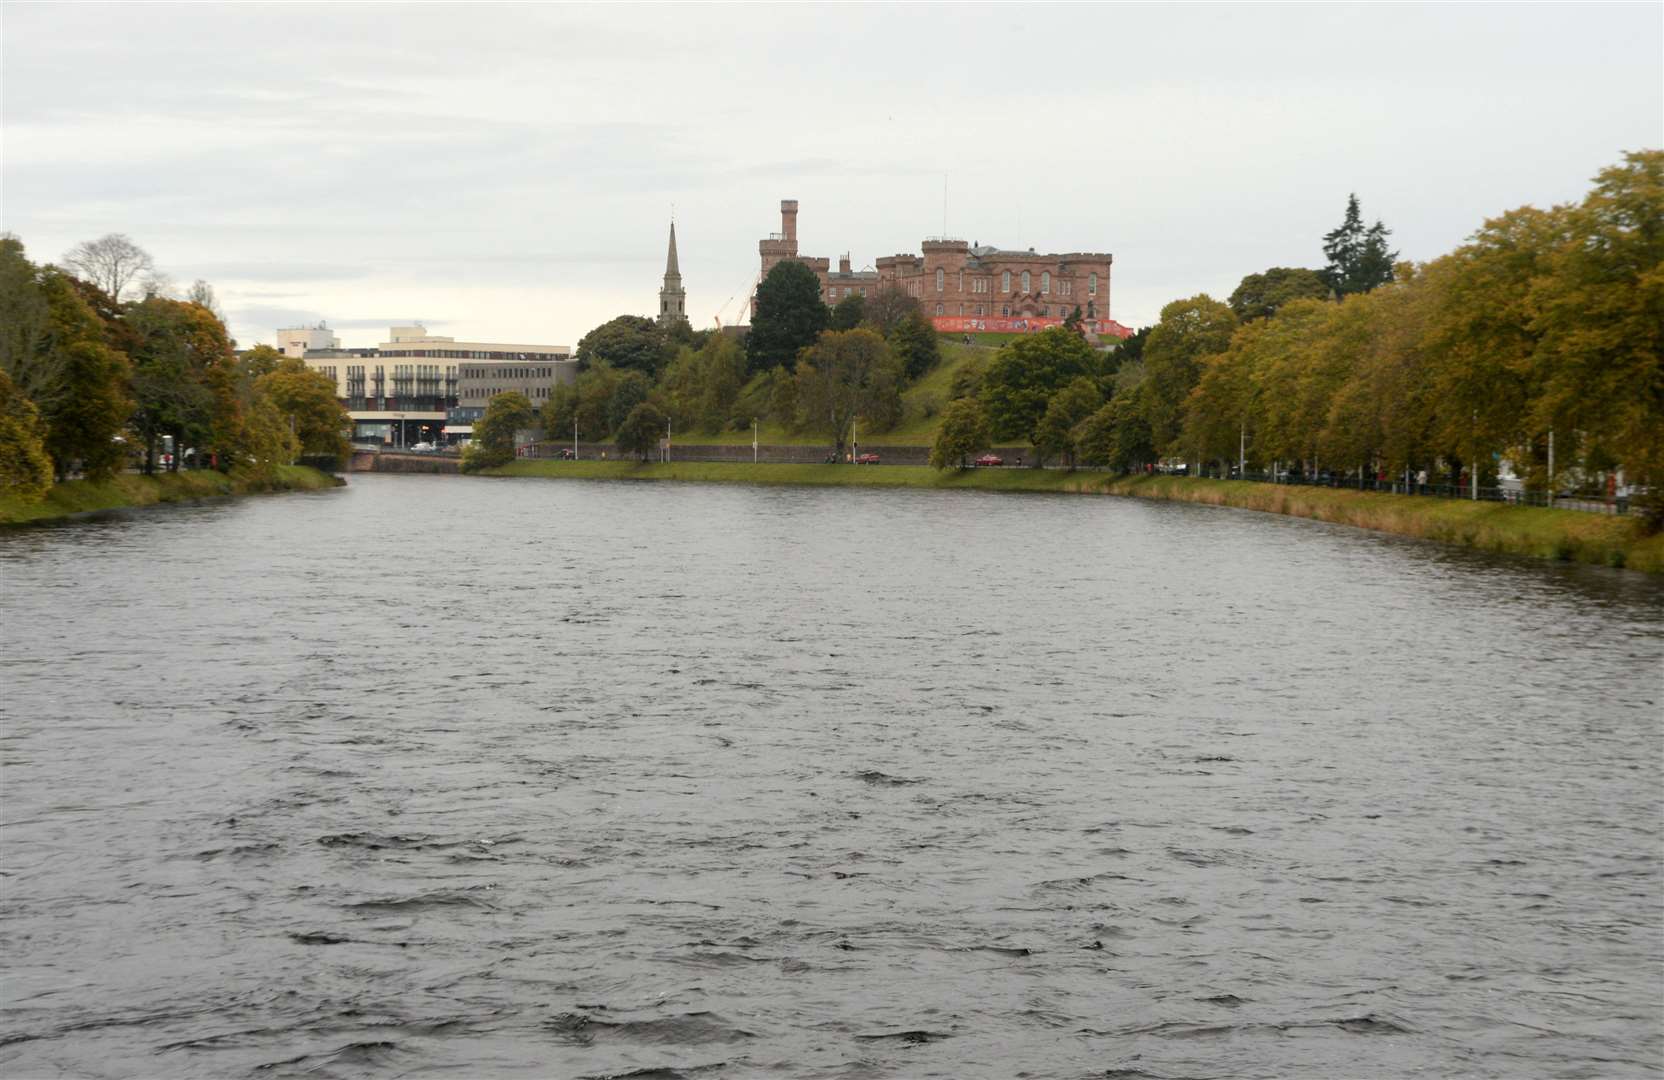 Inverness is well on the way to gigabit connectivity which can be appealing for businesses.